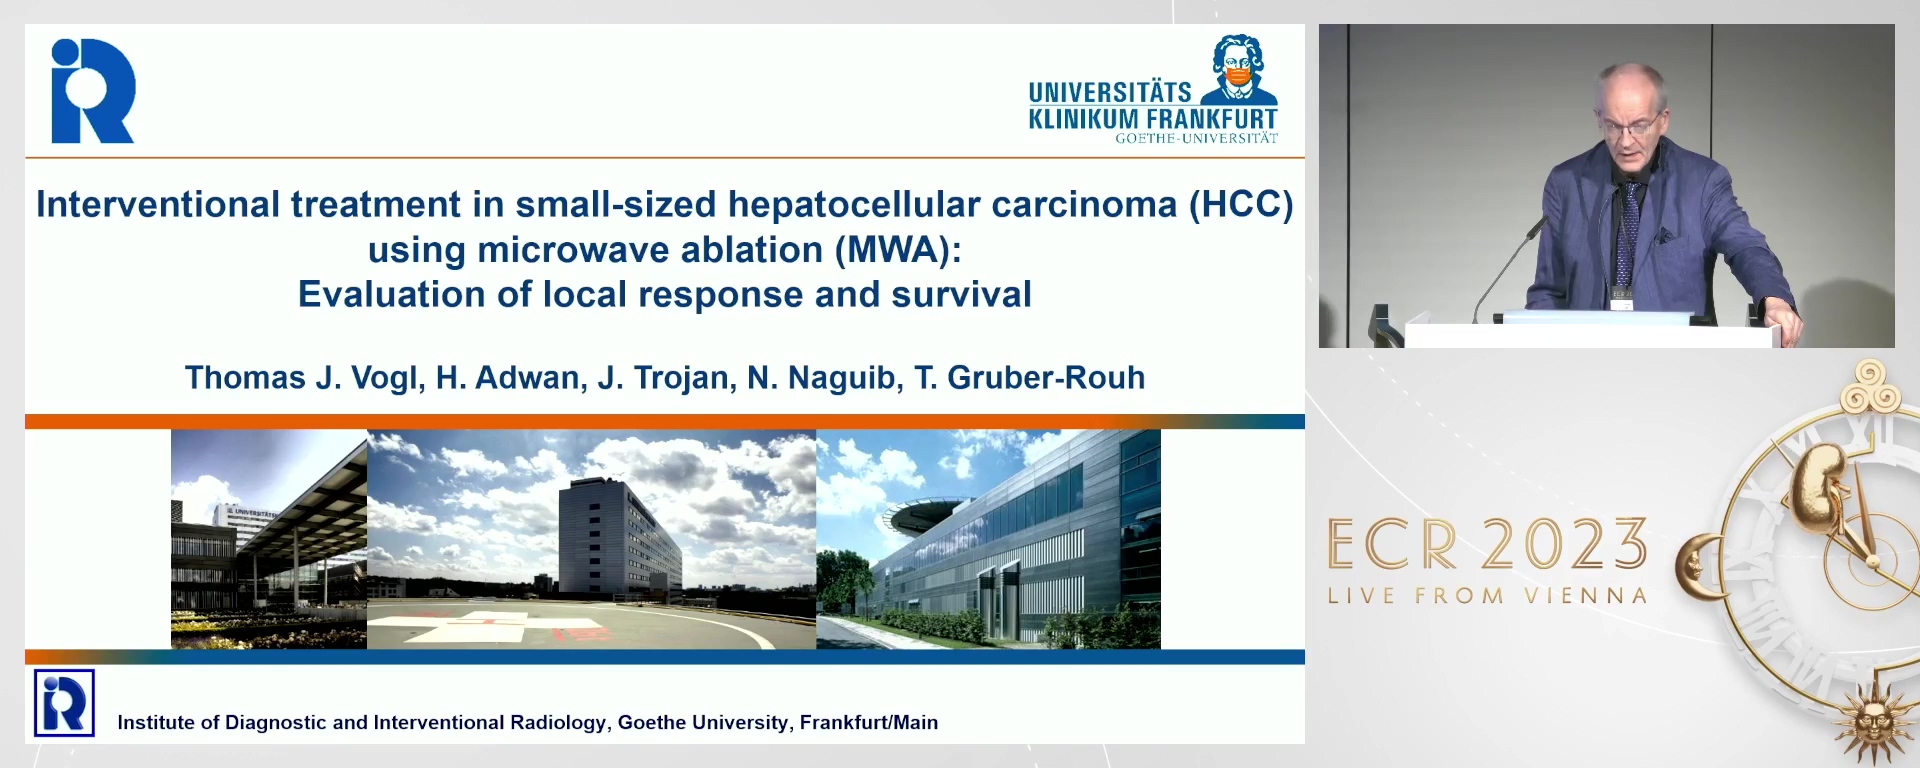 Interventional treatment in small-sized hepatocellular carcinoma (HCC) using microwave ablation (MWA): evaluation of local response and survival